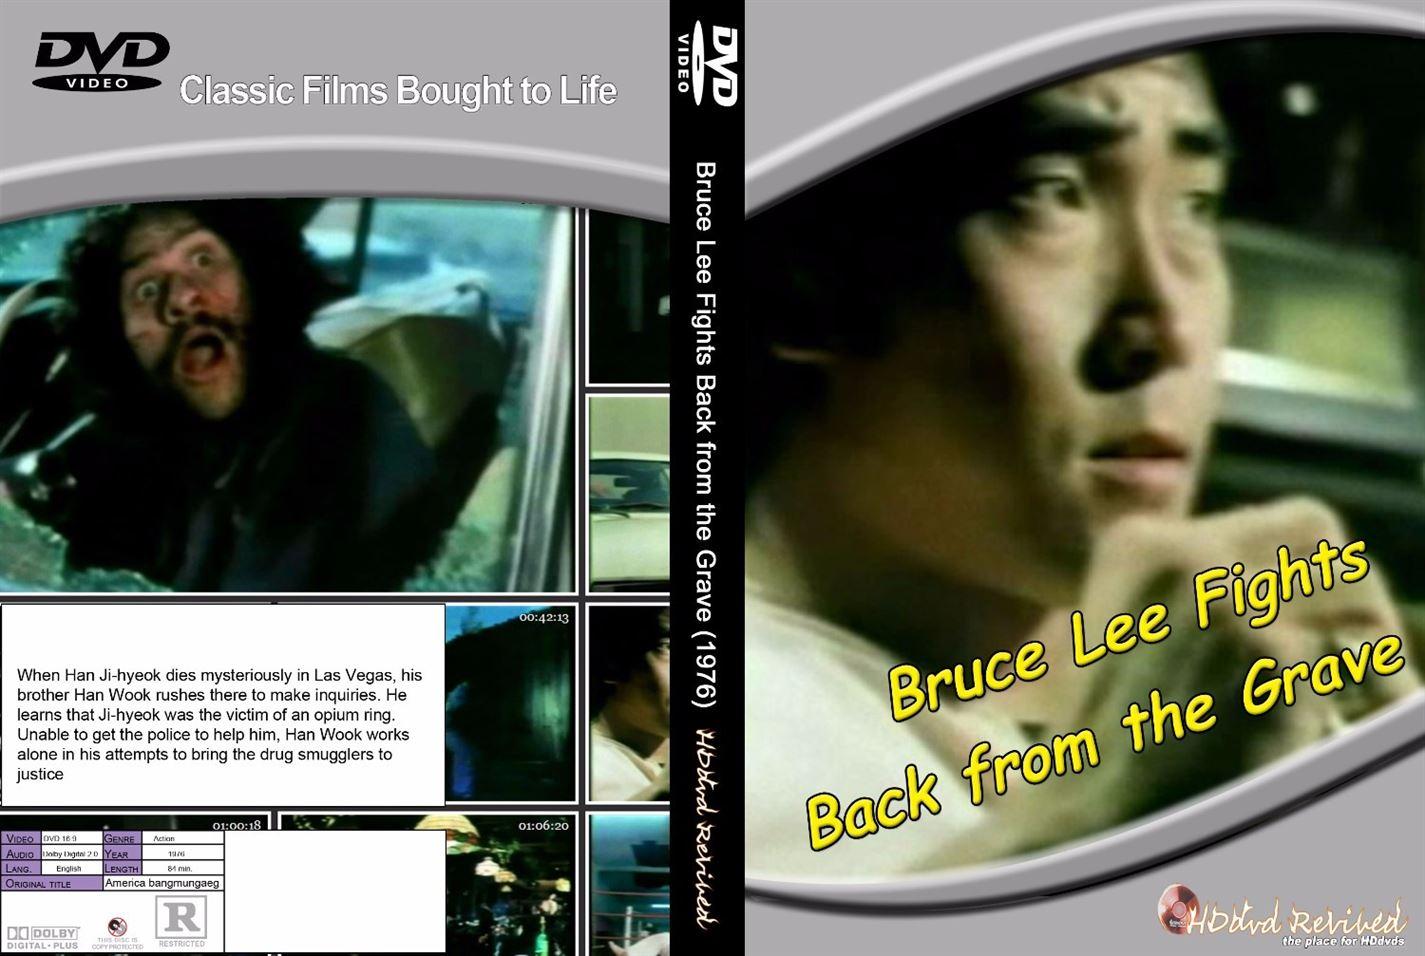 Bruce Lee Fights Back From The Grave (1976) - DVD - (HDDVD-Revived)